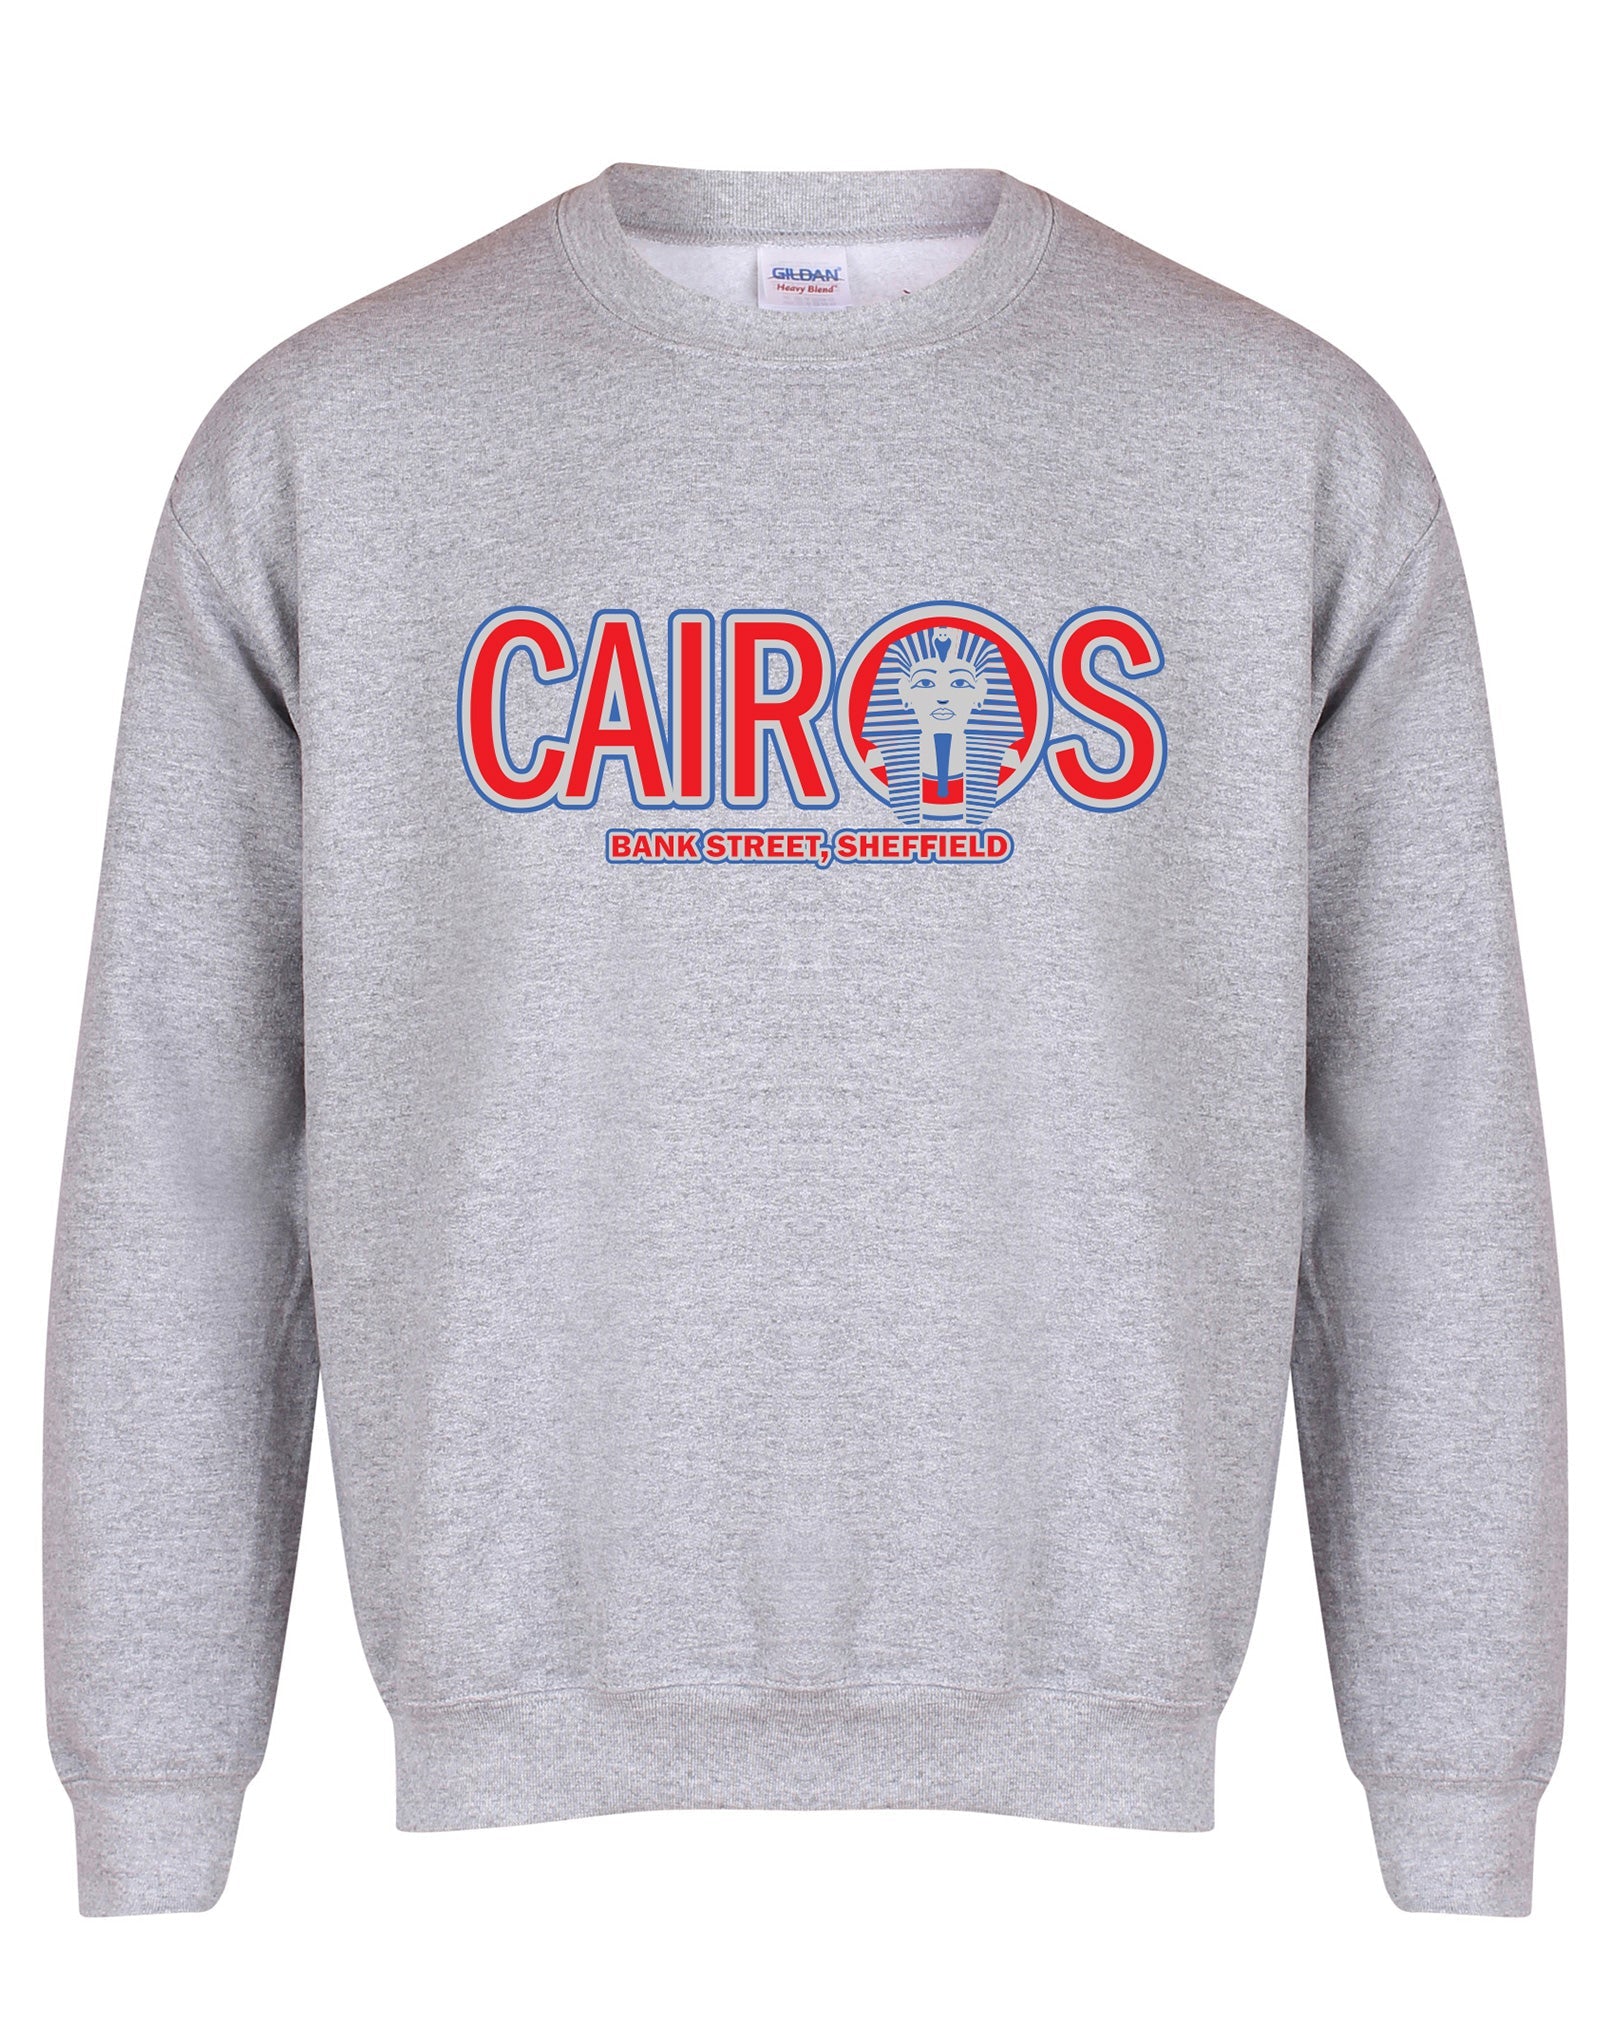 Cairos unisex fit sweatshirt - various colours - Dirty Stop Outs